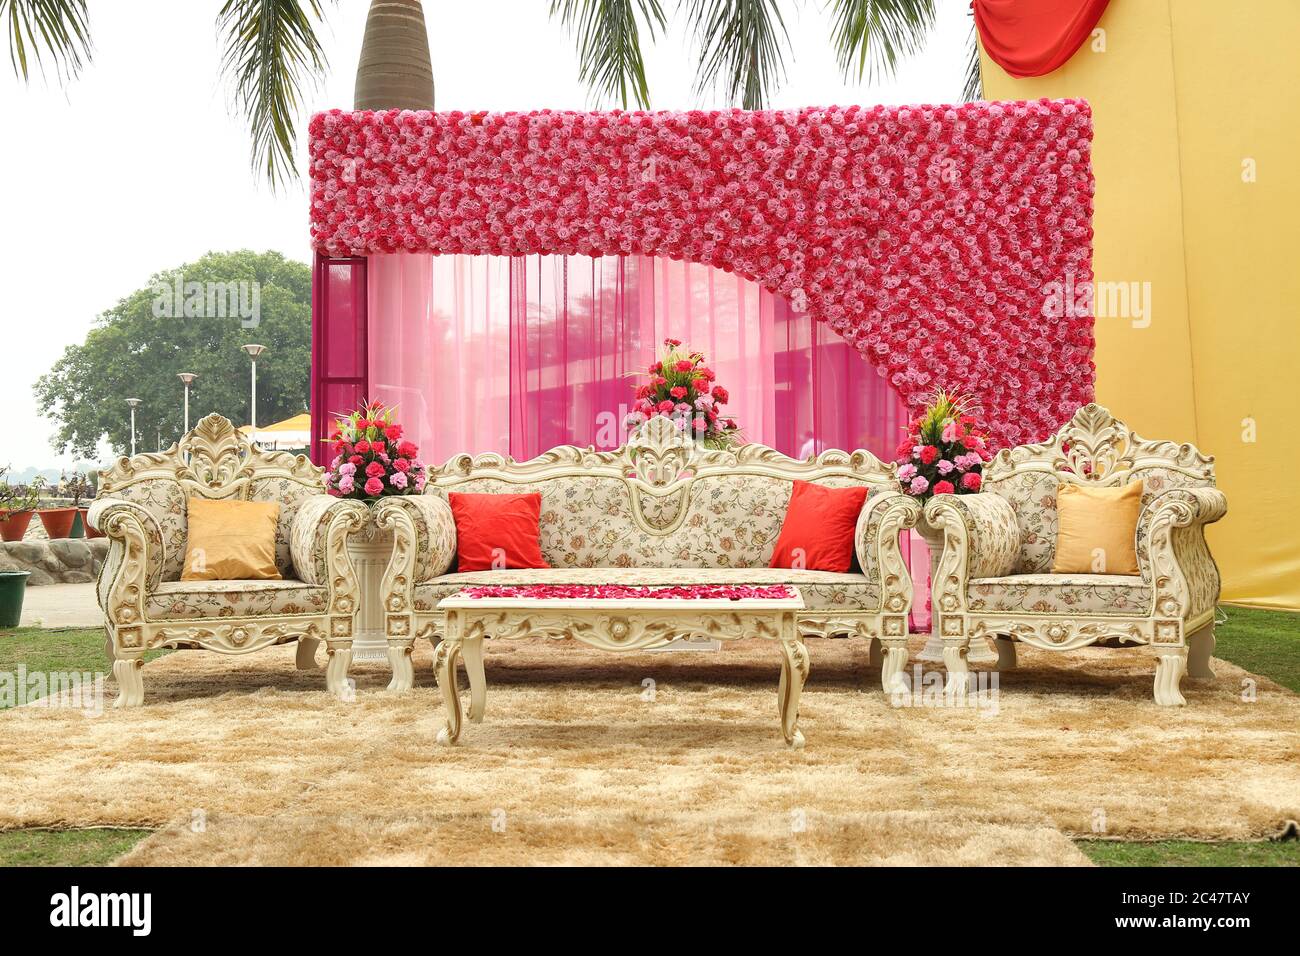 Weeding sofa for bride and groom Stock Photo